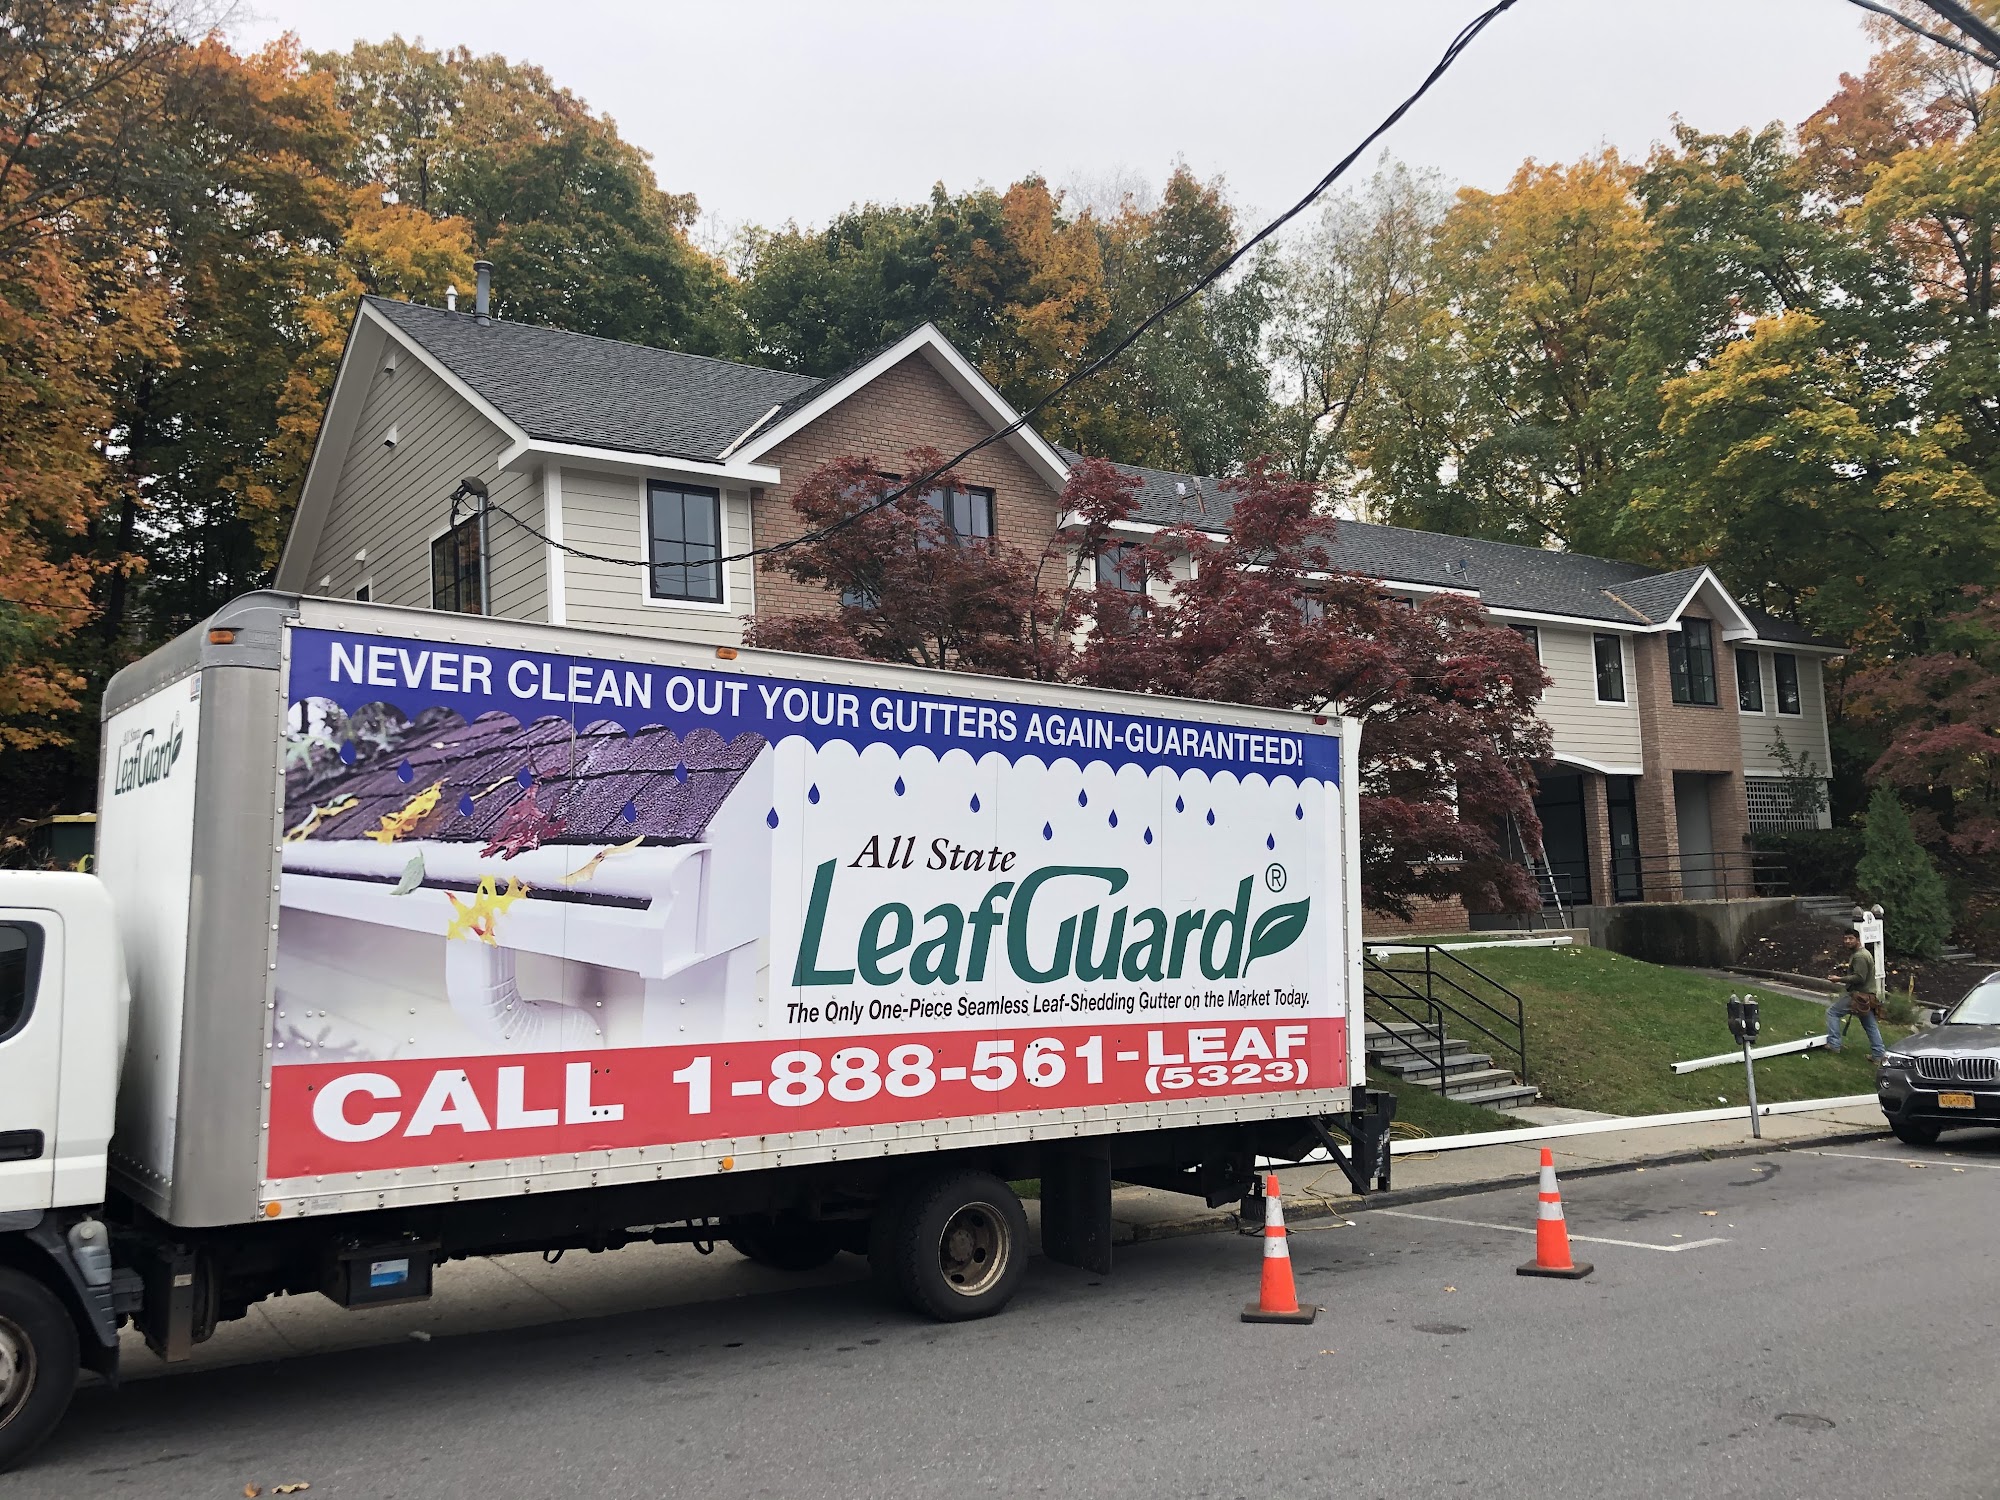 All State Leaf Guard Gutters Inc. 189 Marble Ave, Pleasantville New York 10570